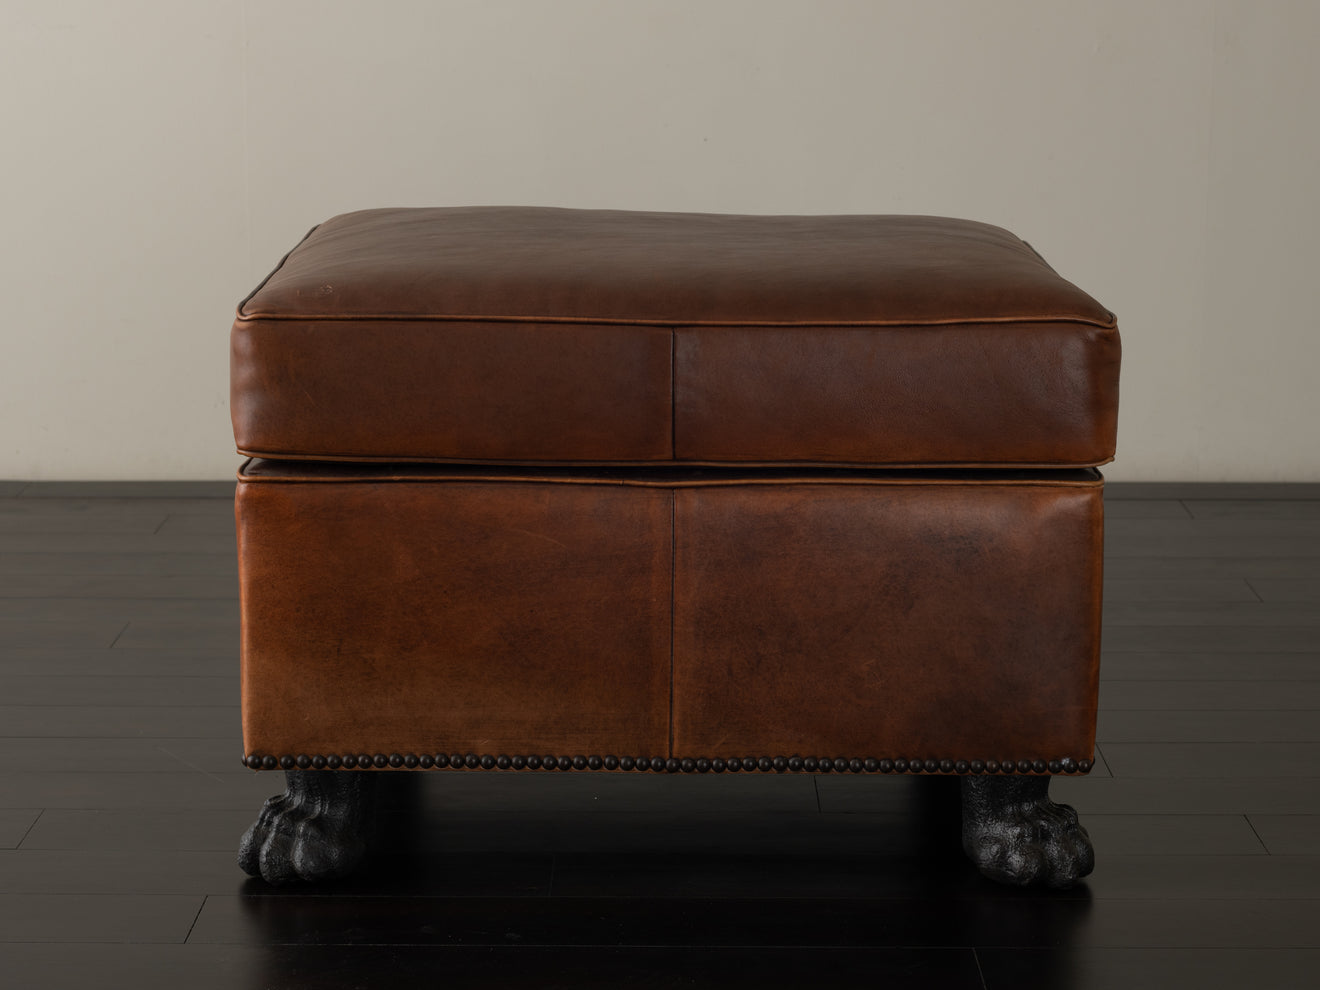 BRONZE FOOTED LEATHER OTTOMAN